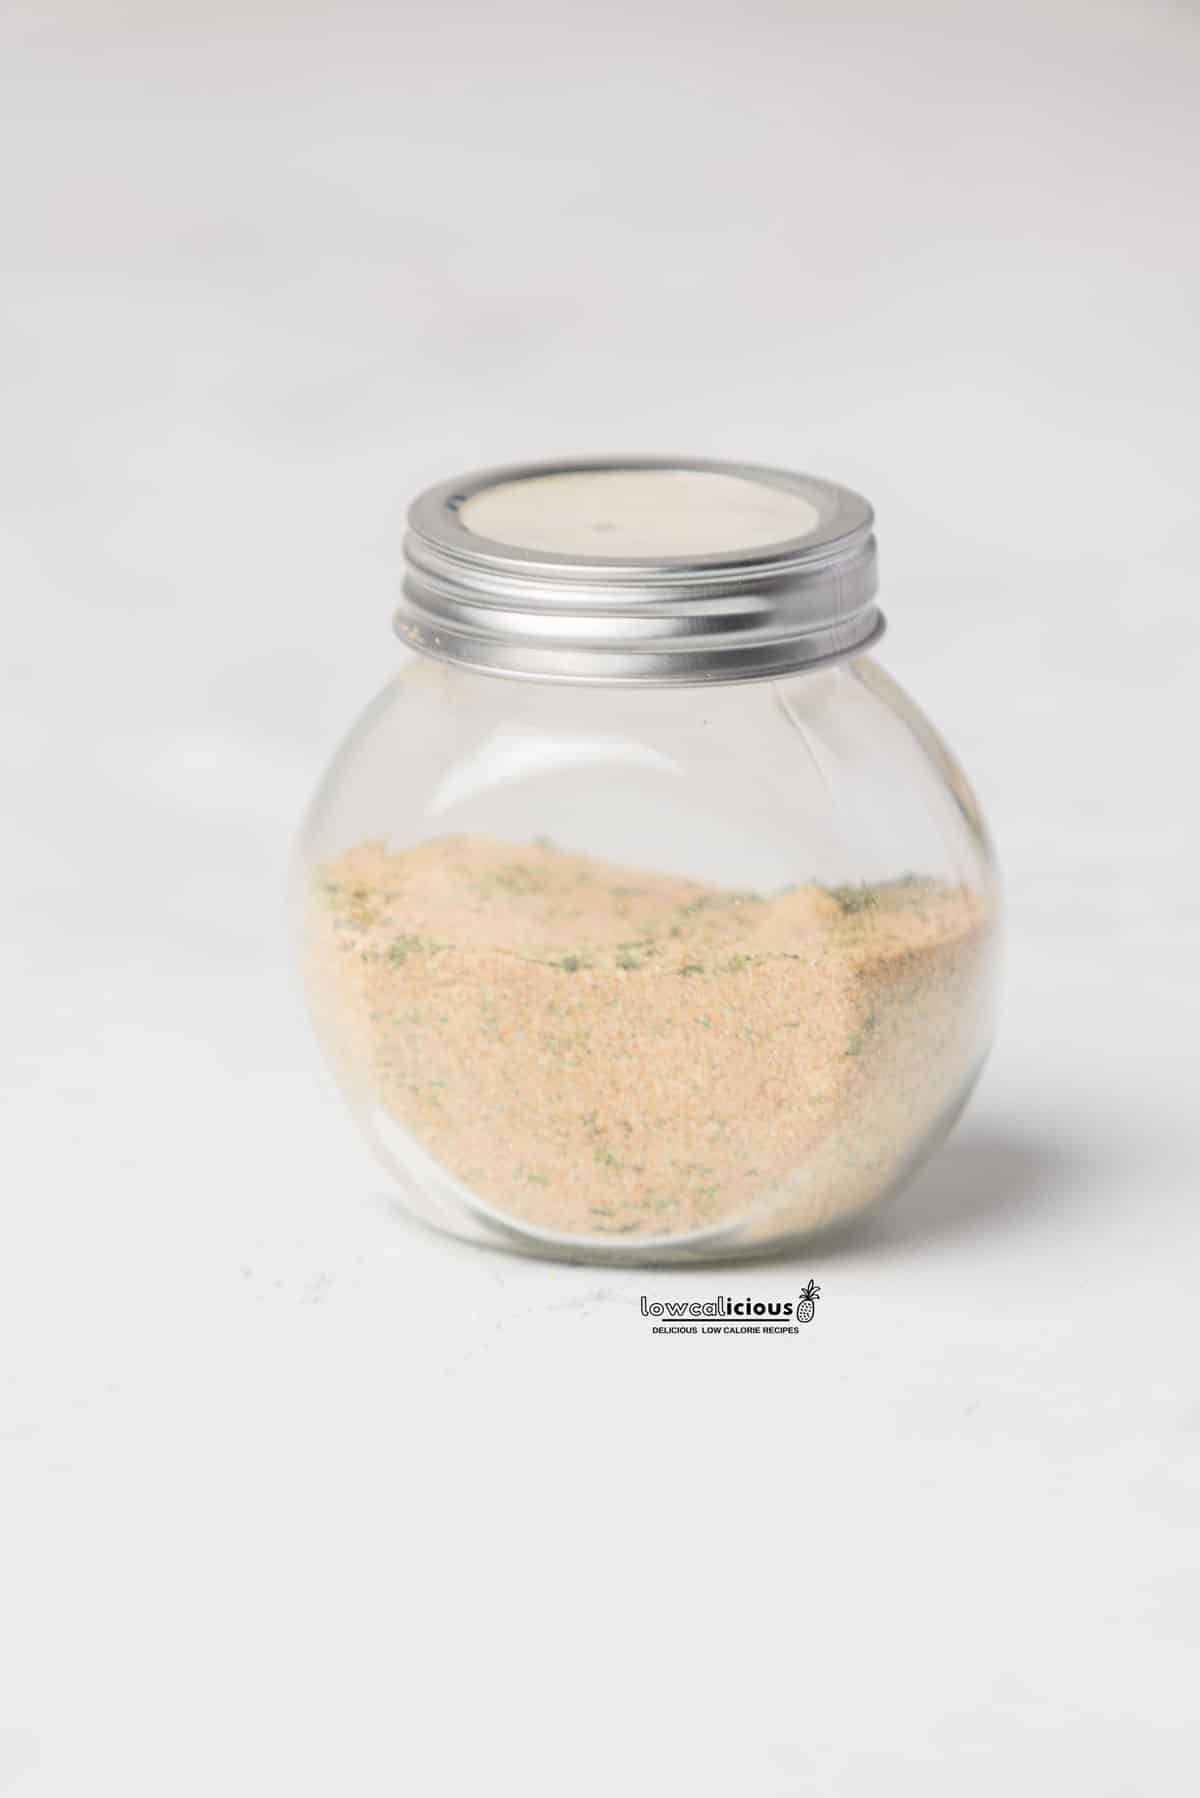 a homemade chicken seasoning recipe (chicken rub) stored in a clear glass jar with a silver screw-on top